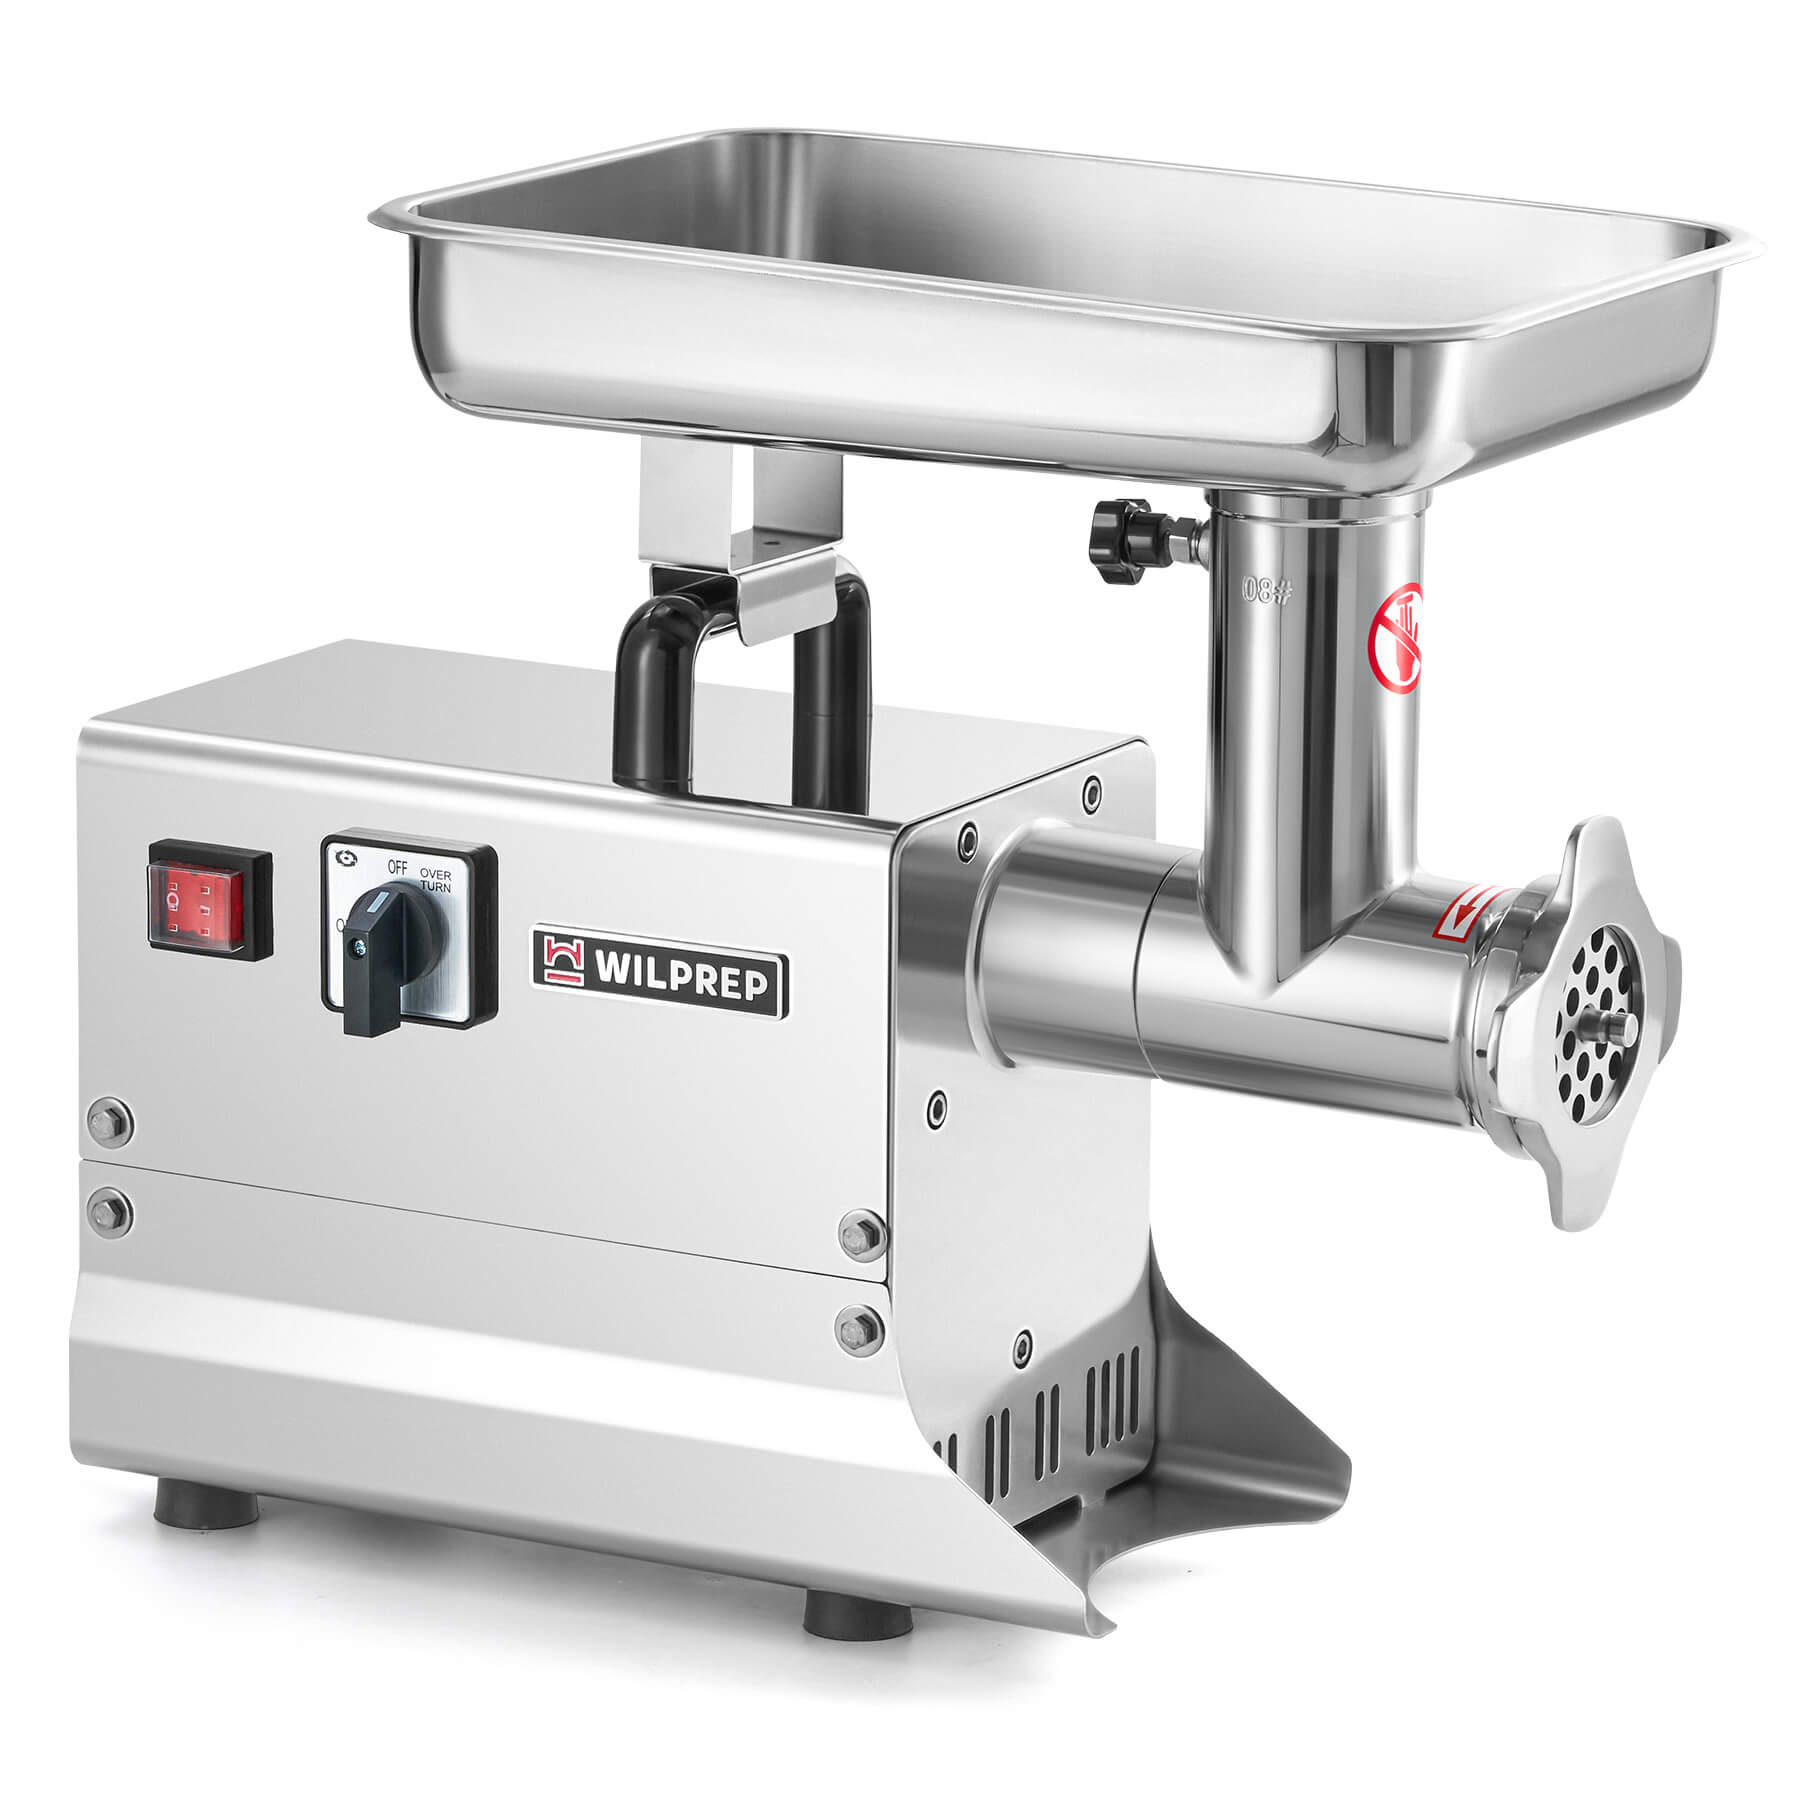 300W Electric Meat Grinder with Reverse Function ETL Approved-110V,2/5 hp